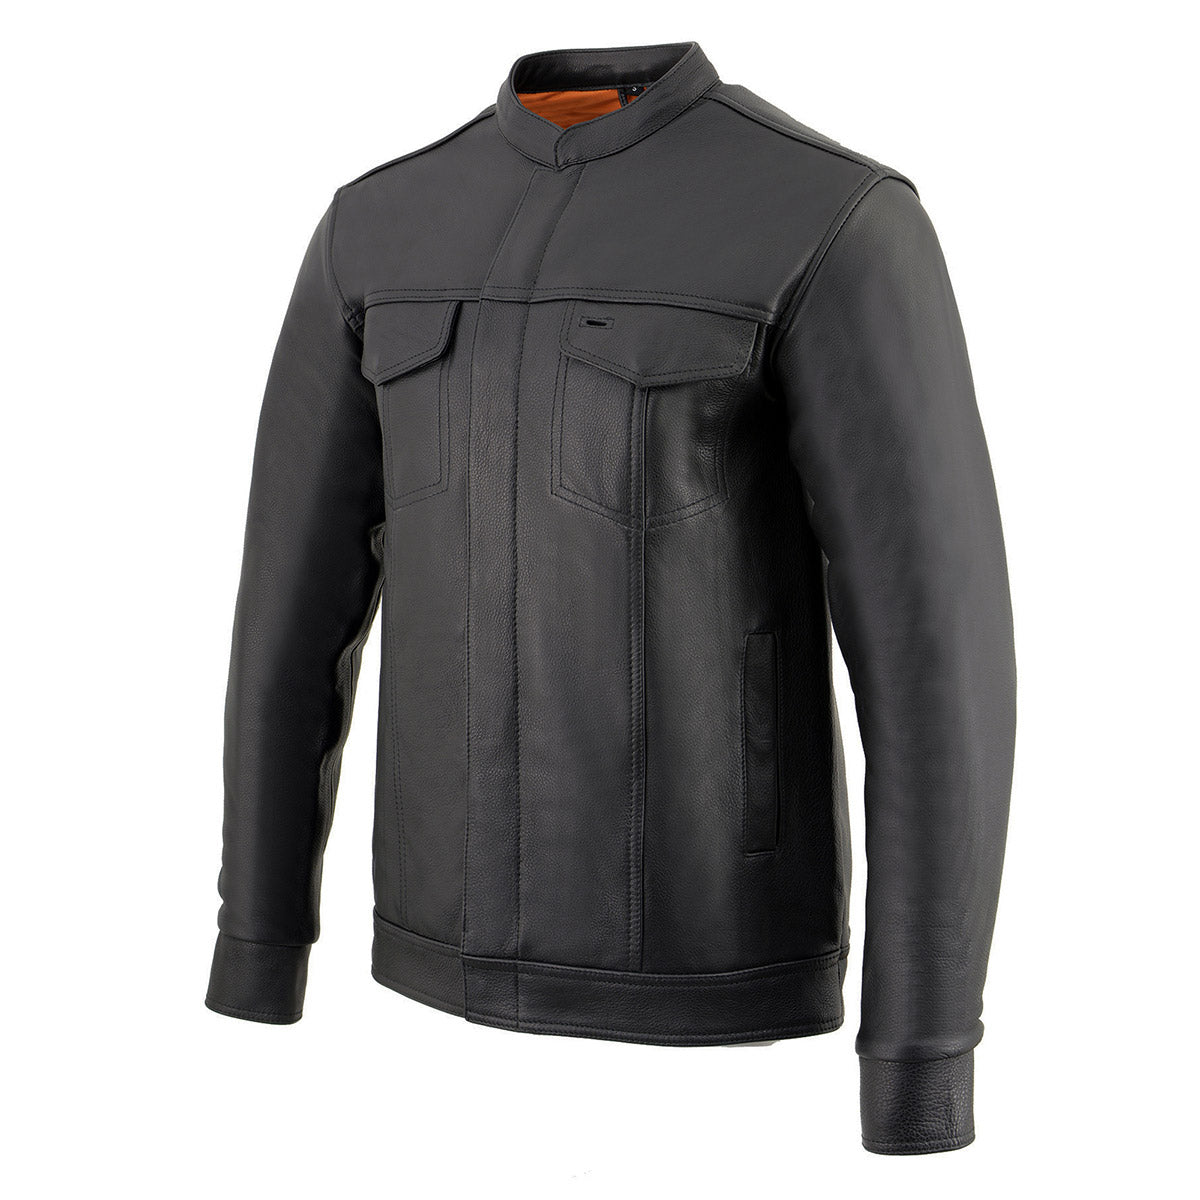 Milwaukee Leather MLM1610 Men's Club Style Black Casual Biker Leather Shirt with Dual Closure